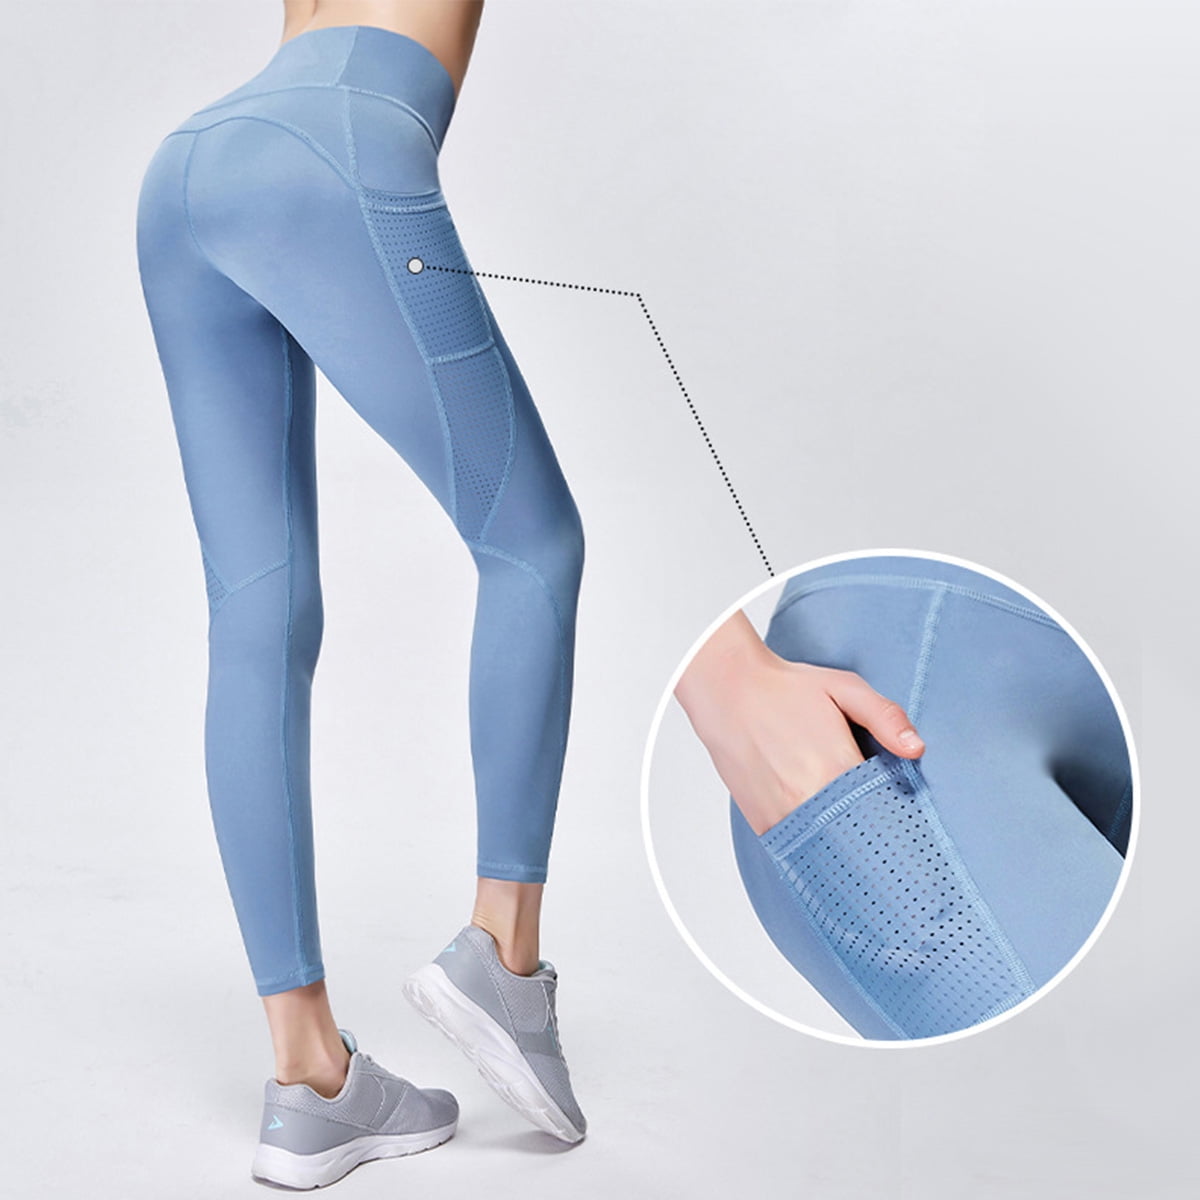 SEVEGO Women's Cargo Yoga Leggings with 4 Pockets Stretchy High Waisted Tummy Control Athletic Workout Pants Gym Tights 